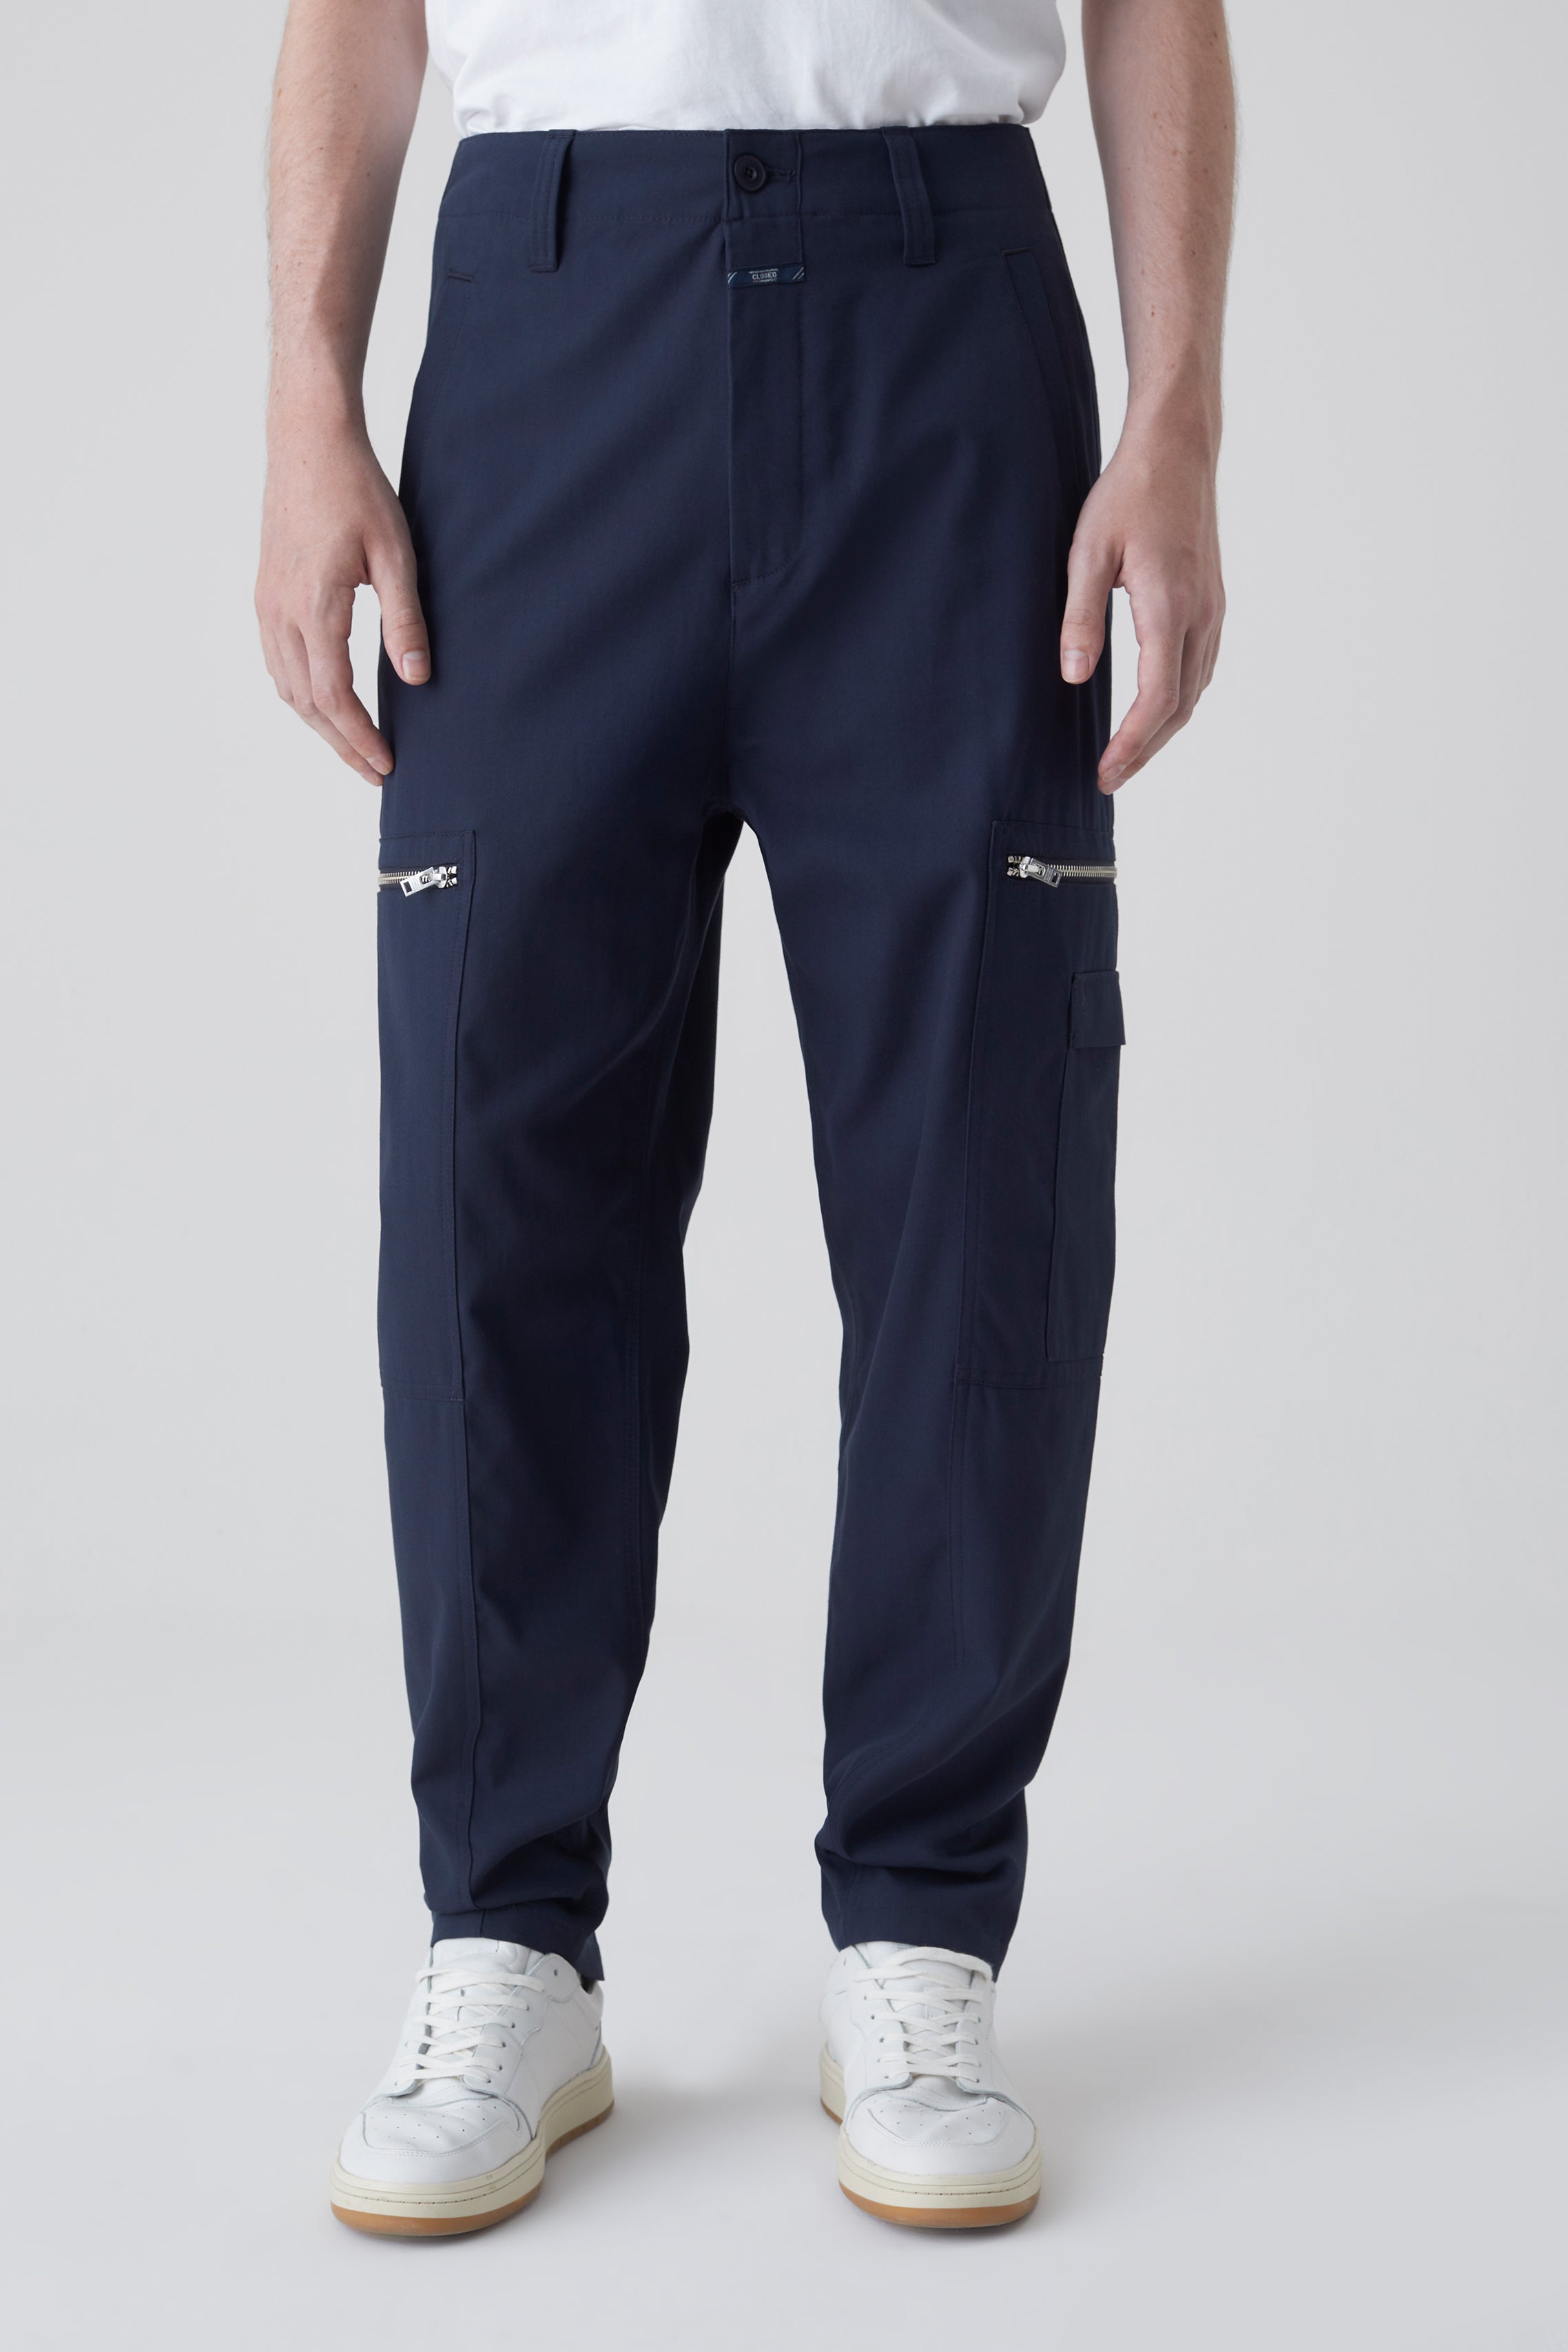 CLOSED-OUTLET-SALE-STYLE-NAME-PILOT-TAPERED-PANTS-Hosen-ARCHIVE-COLLECTION.jpg